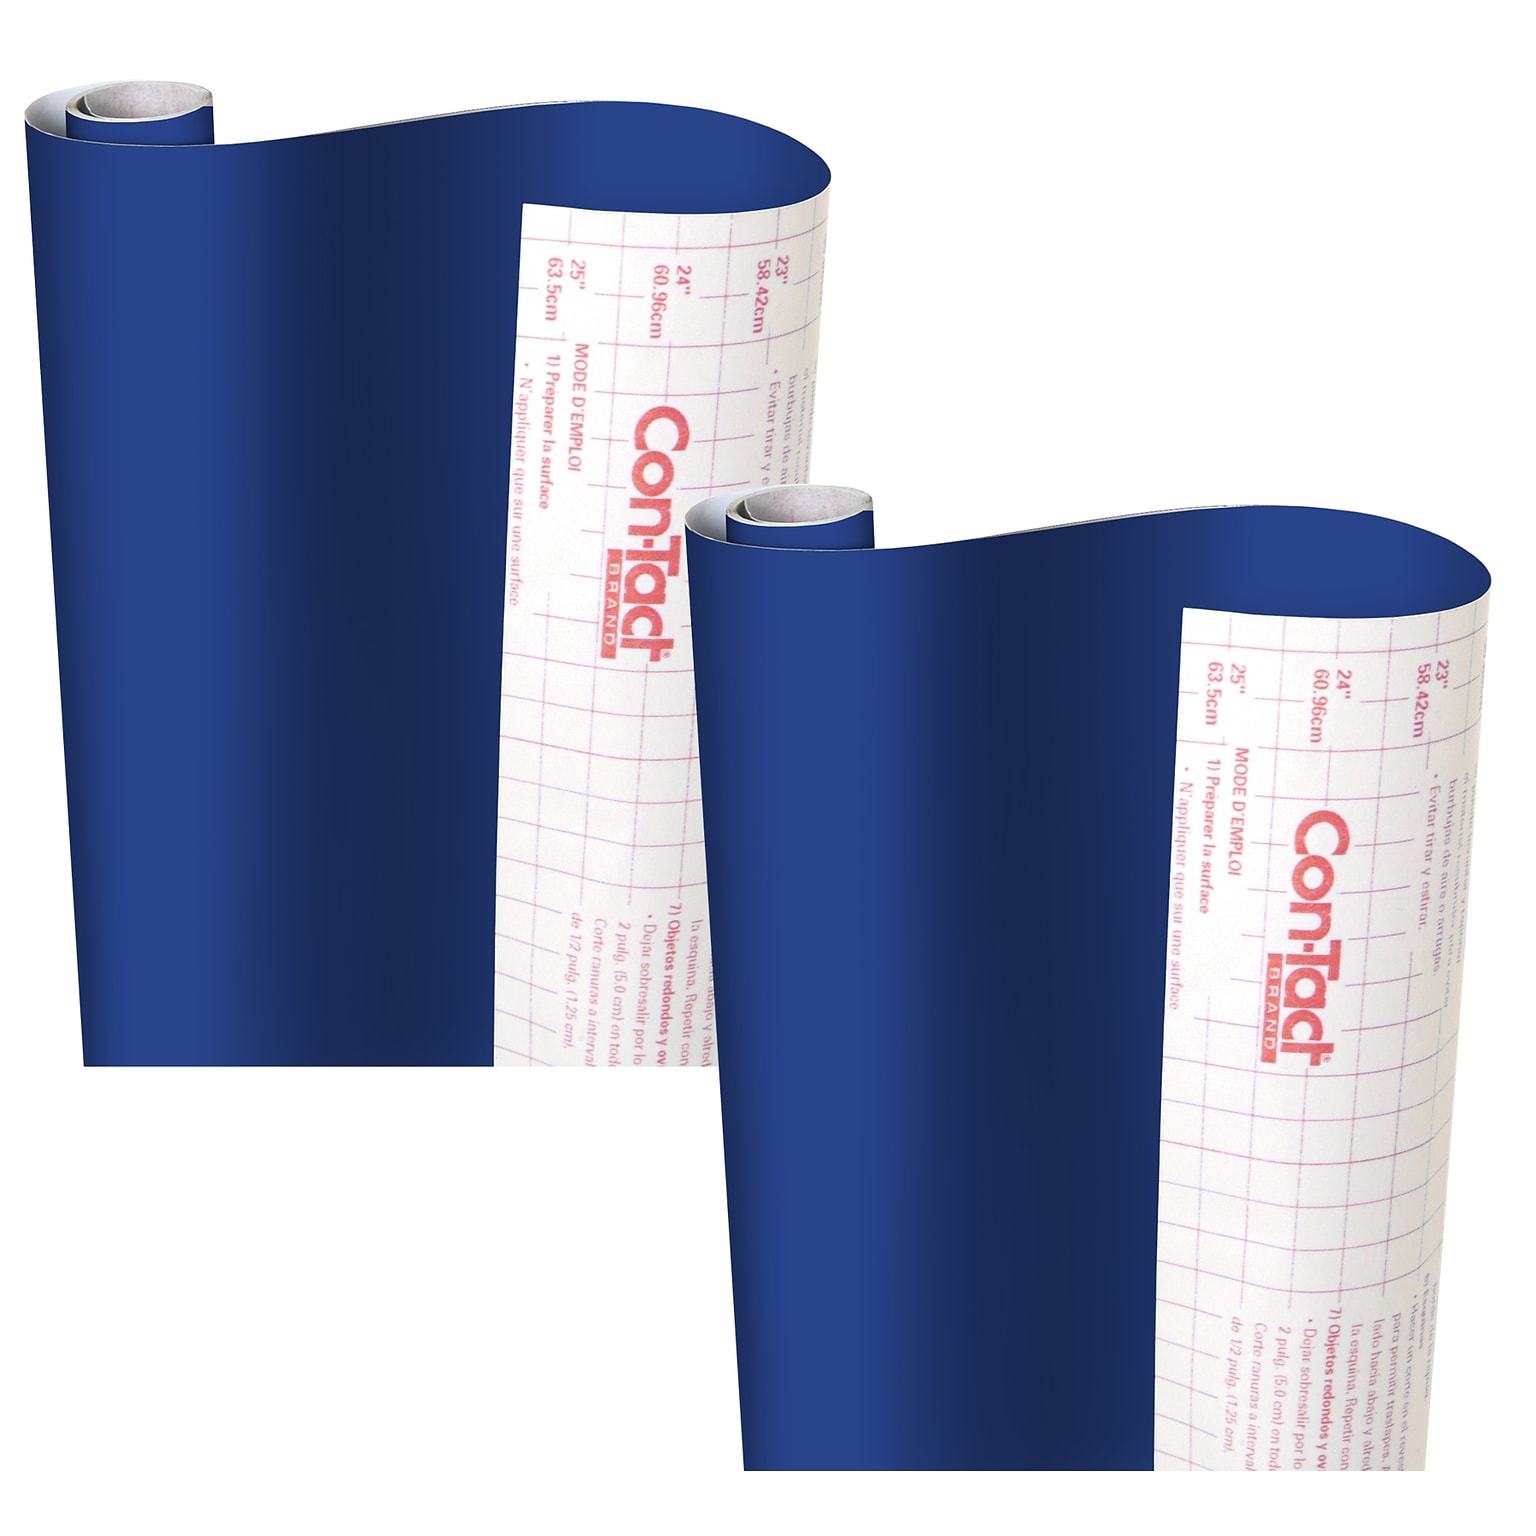 Con-Tact Creative Covering™ Adhesive Covering, 18 x 16 Per Roll, Royal Blue, 2 Rolls (KIT16FC9AH1206-2)